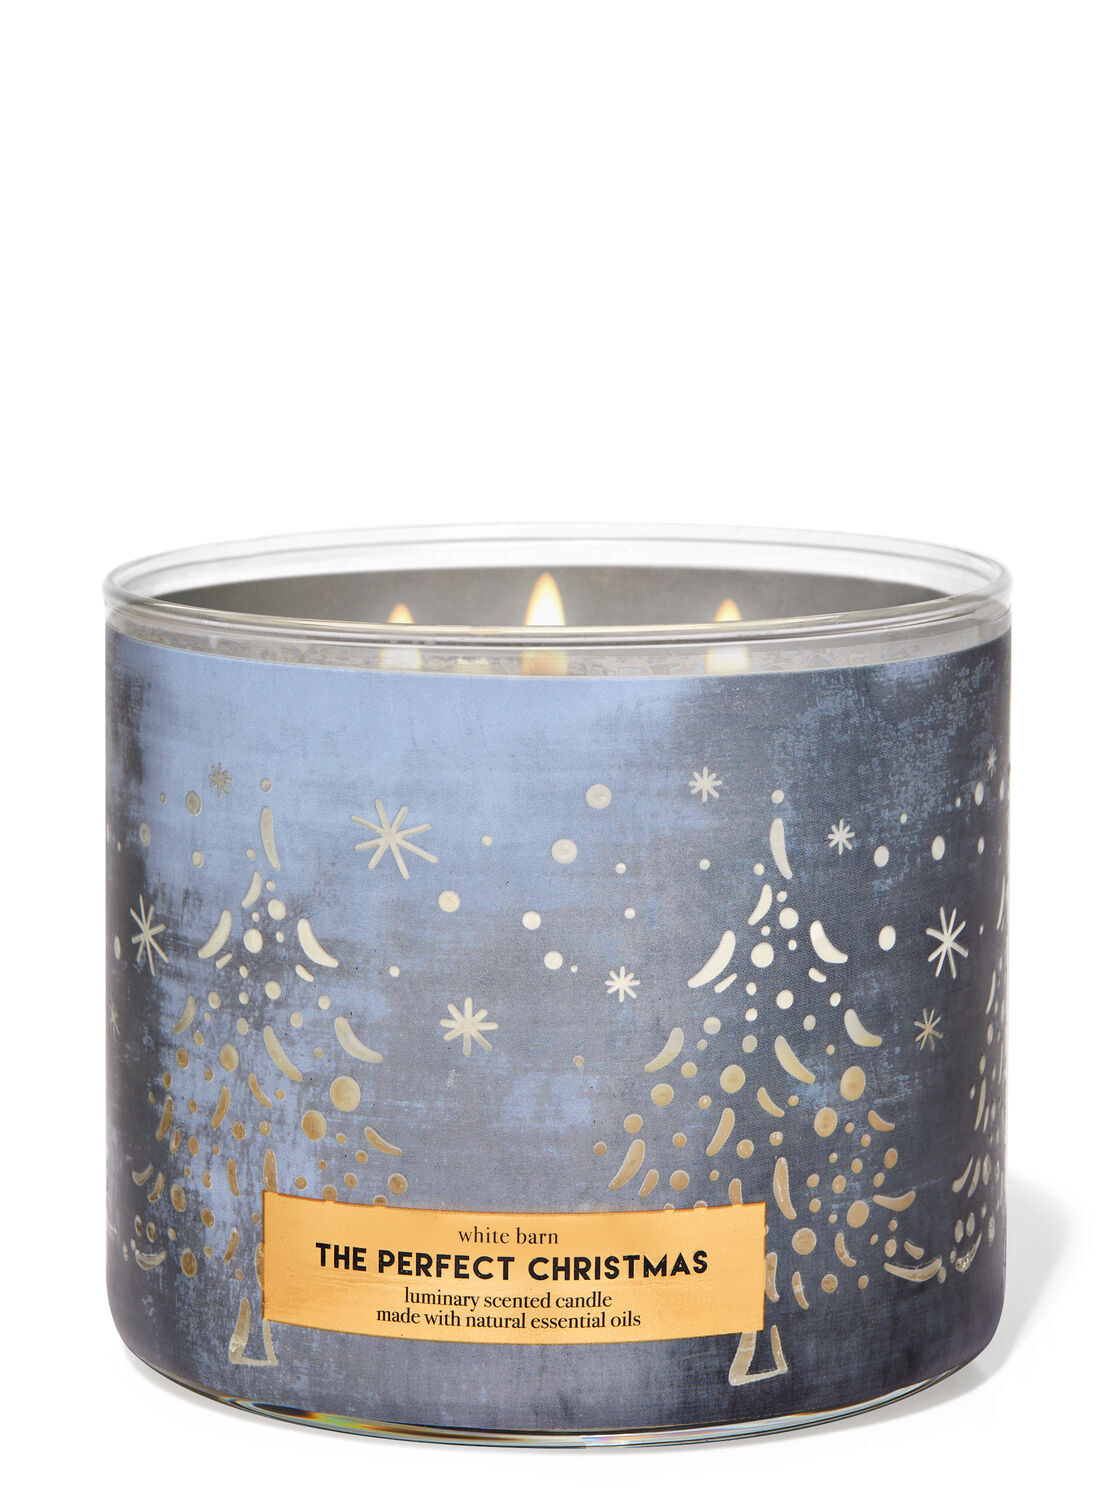 1 Bath & Body Works THE PERFECT CHRISTMAS Large 3-Wick Candle 14.5 oz 